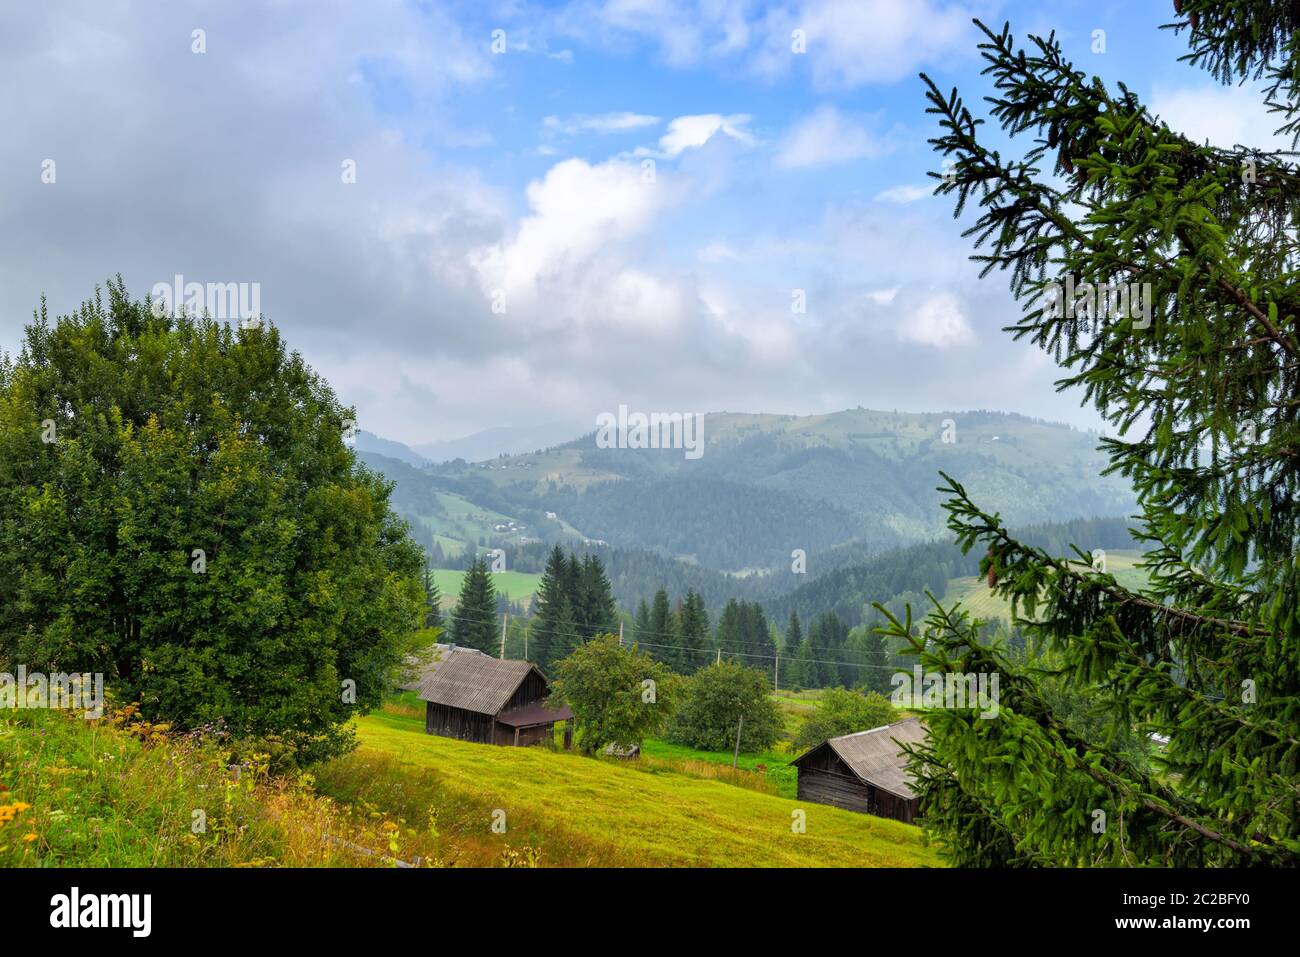 Nature in the mountains, beautiful mountain scenery, the Carpathian Mountains, a village in the mountains. Stock Photo